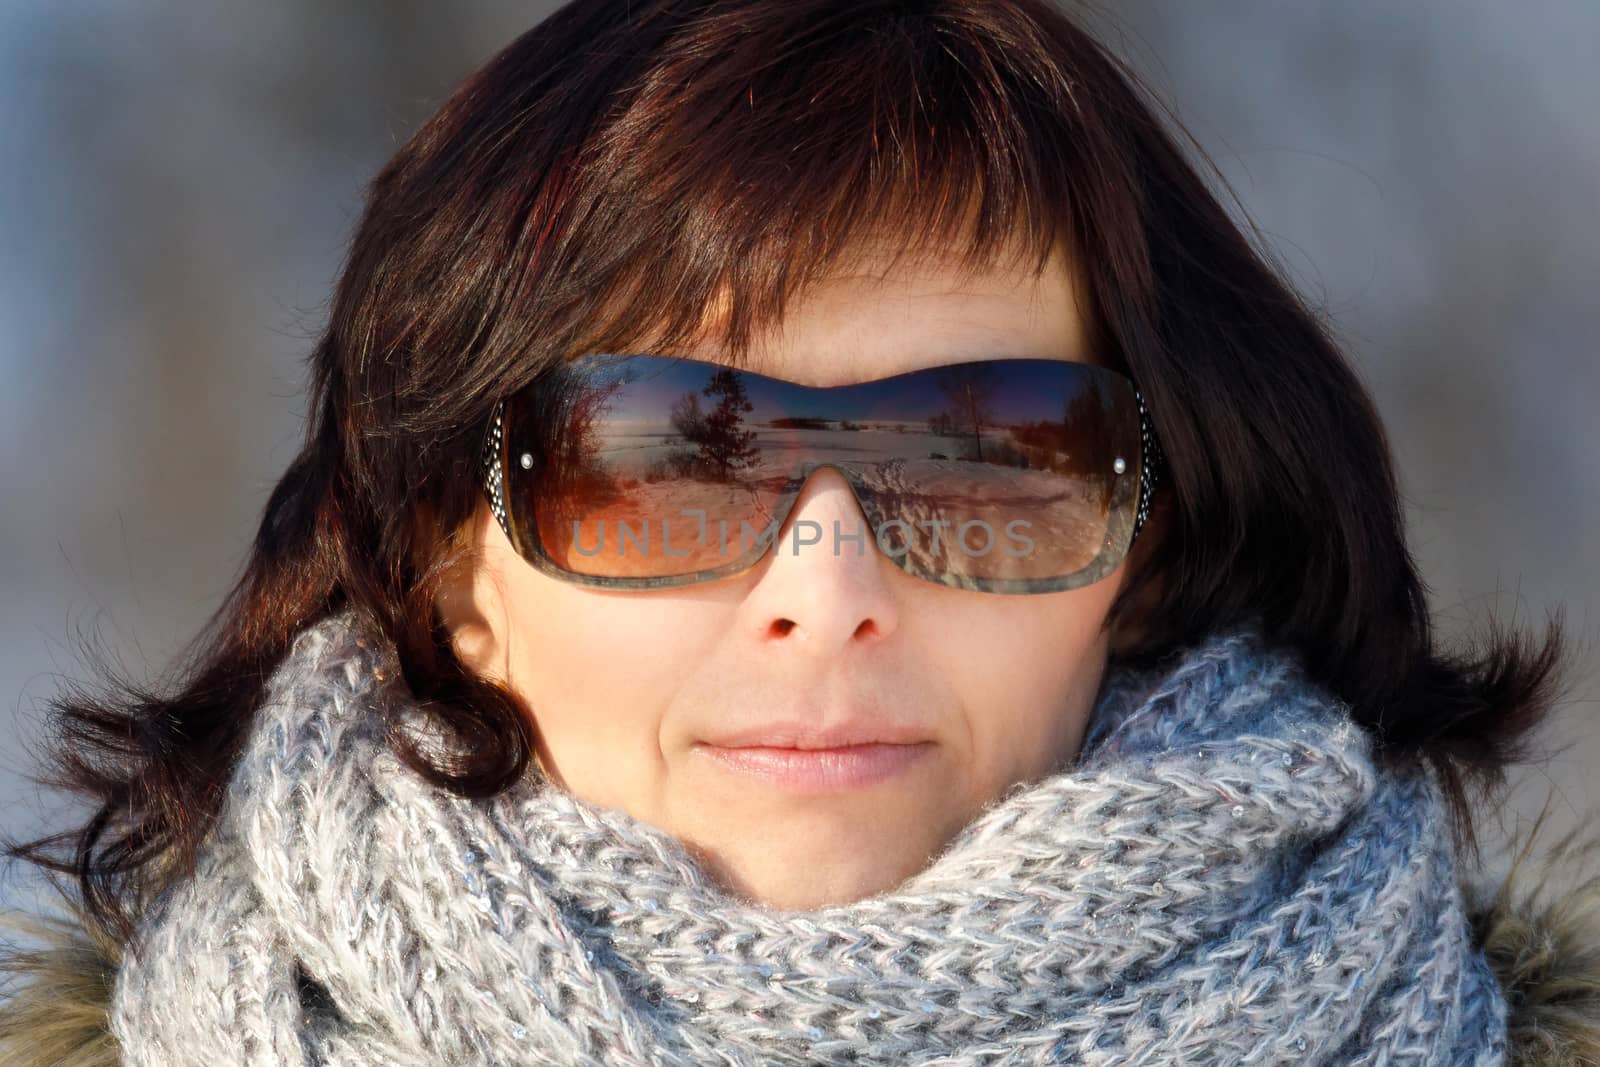 woman with sunglasses without makeup in winter time by artush